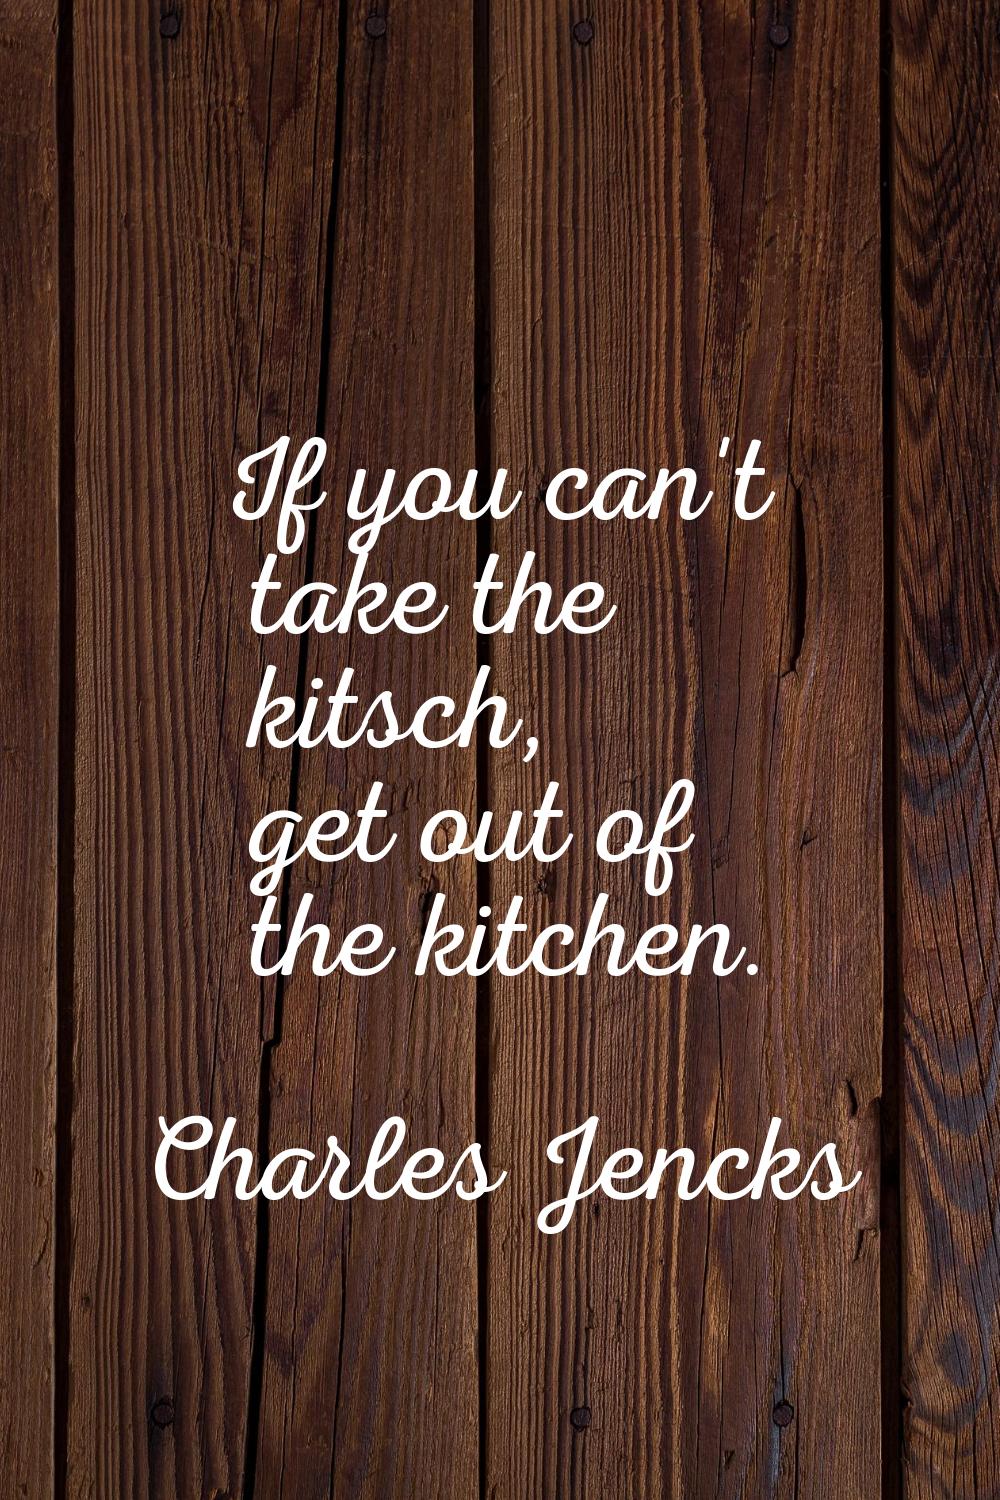 If you can't take the kitsch, get out of the kitchen.